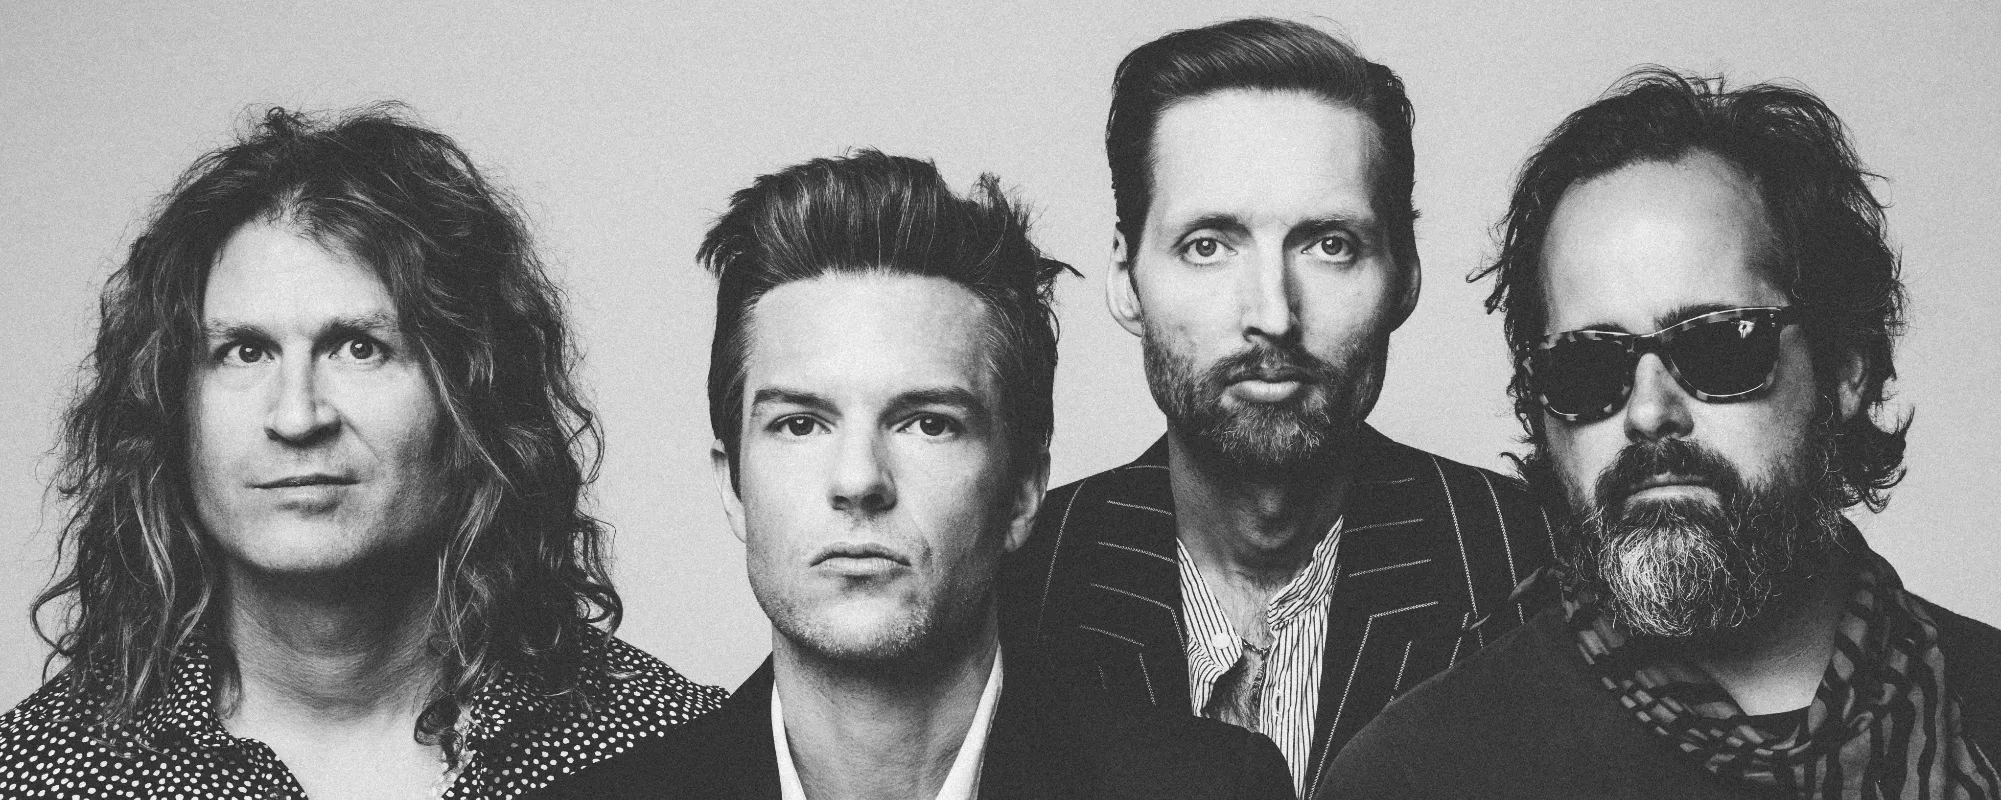 The Killers Announce New Career-Spanning Project ‘Rebel Diamonds’ Out December 8